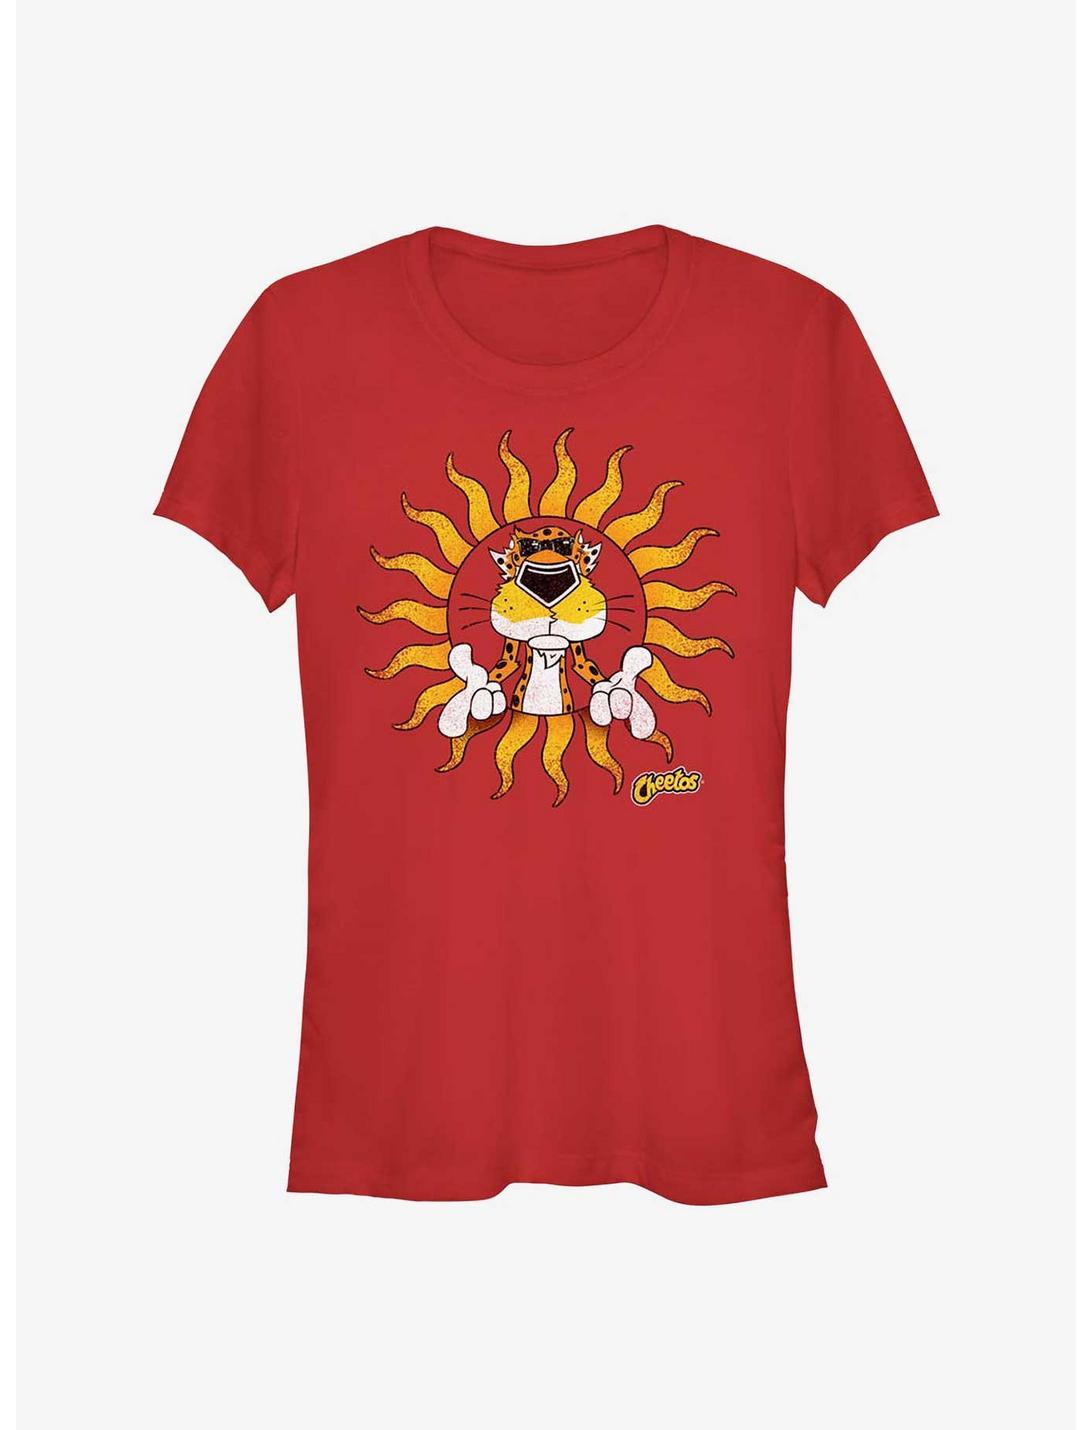 Cheetos Chester Cheese Sun Girls T-Shirt, RED, hi-res